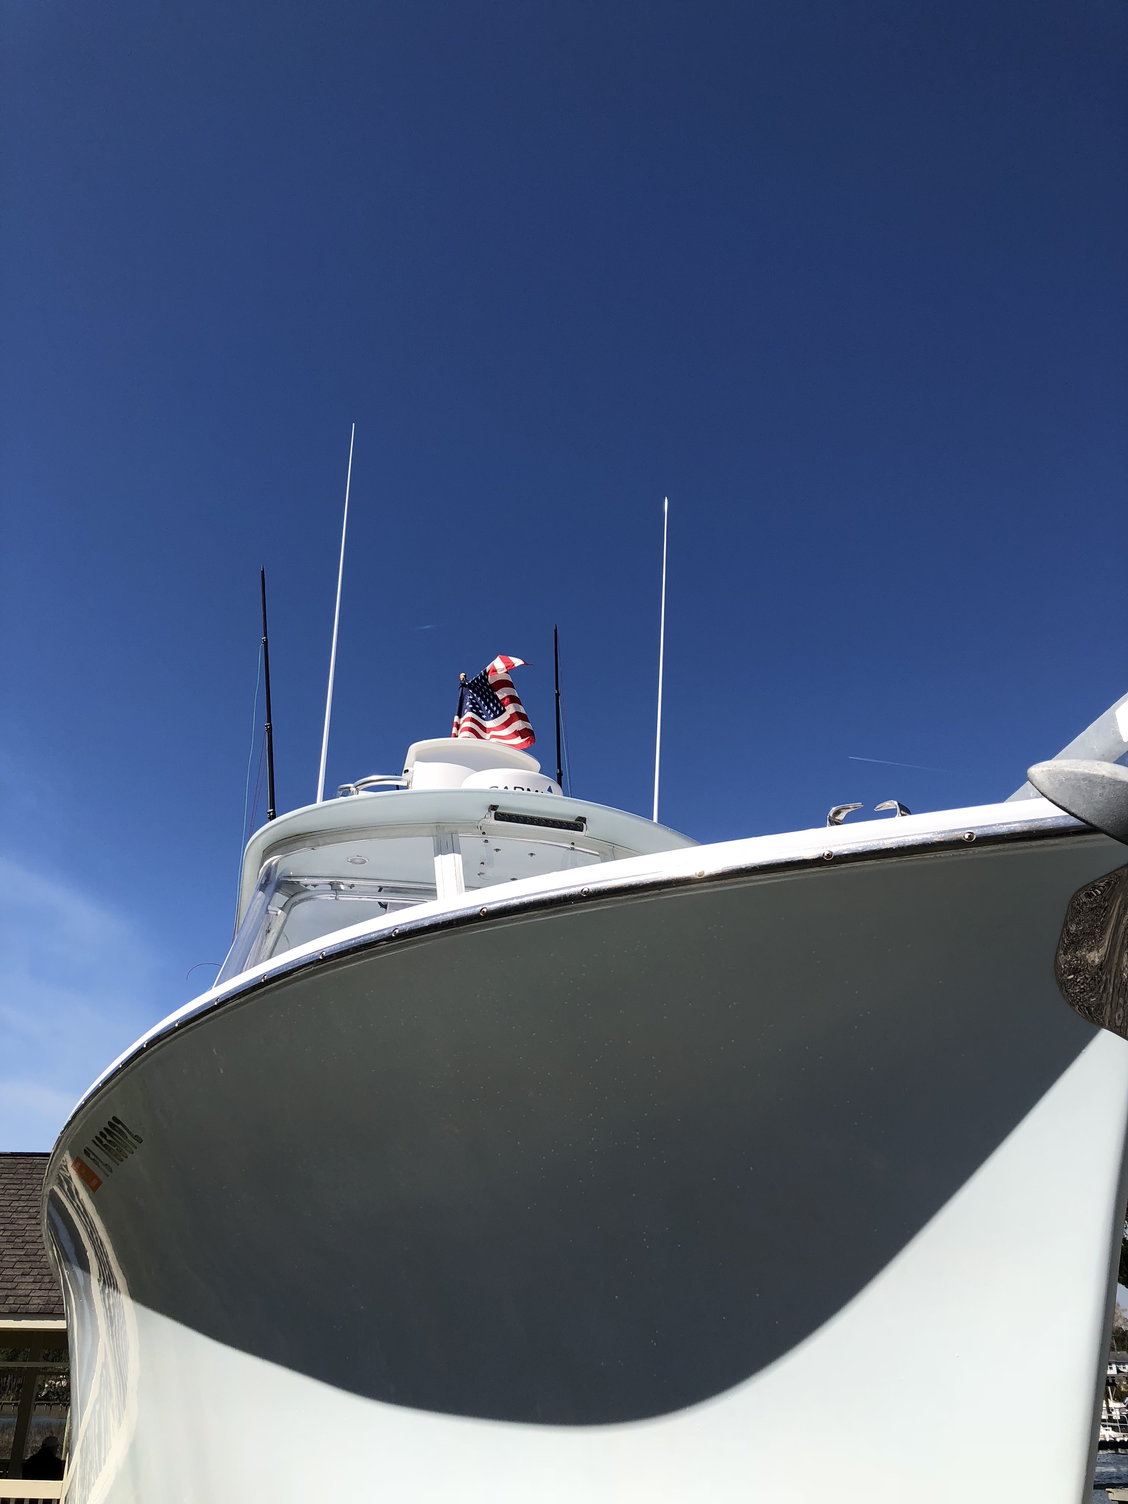 The New RigTides Yachts 27, Fully Restored and Ready - The Hull